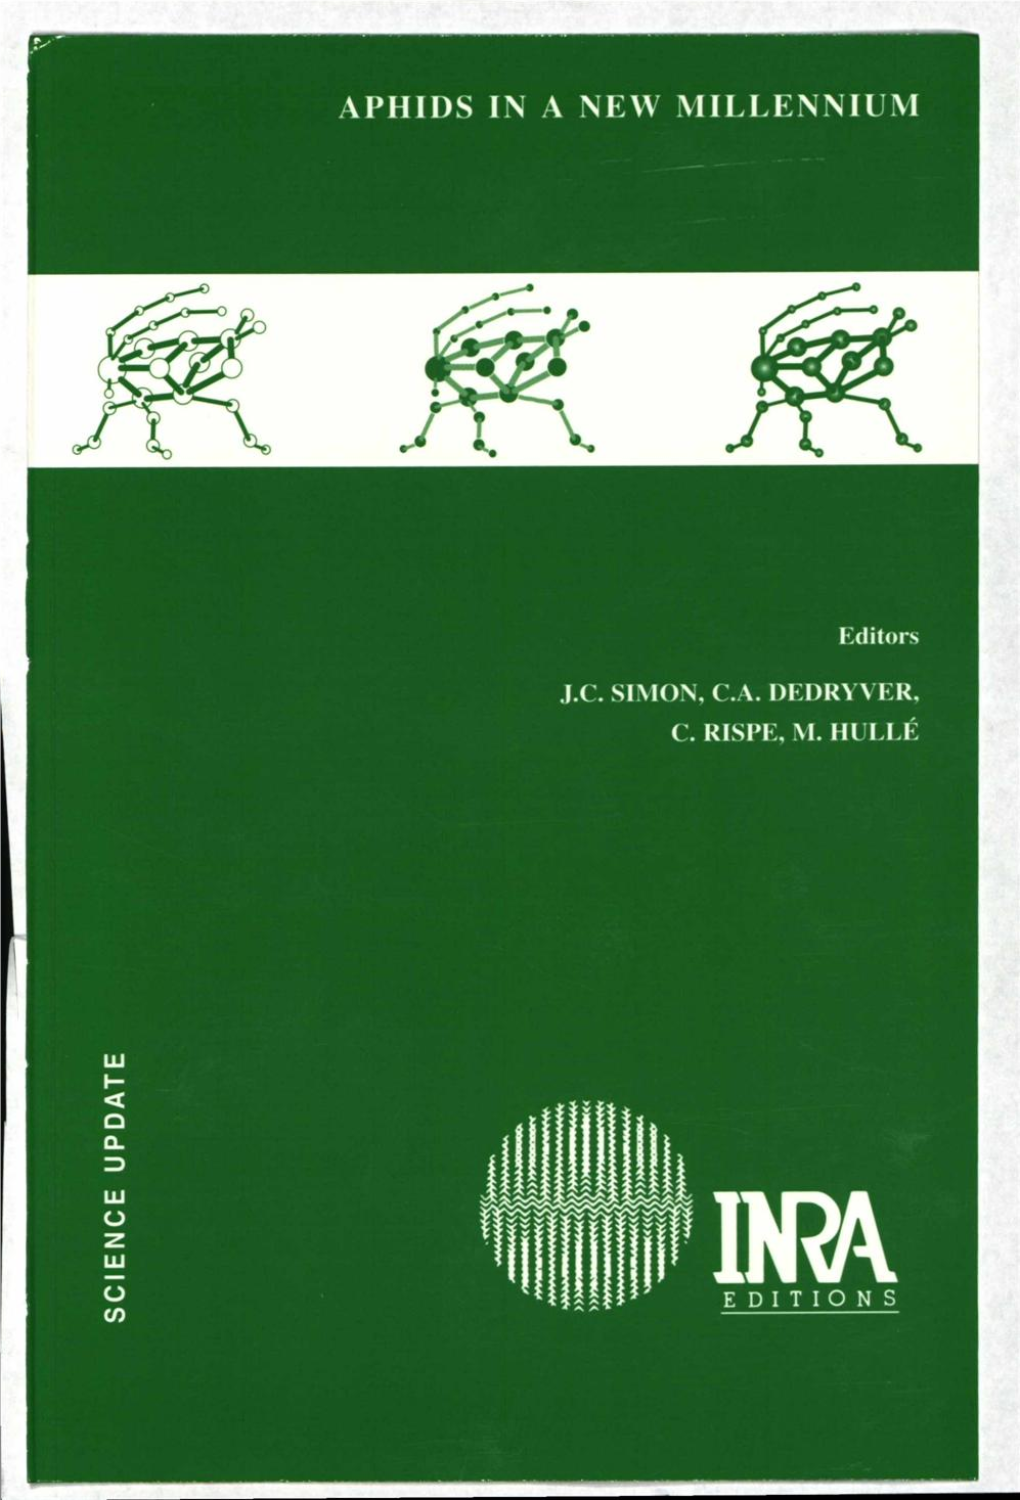 Past and Future of Aphid Biology (Invited Paper) 17 Dixon Anthony F